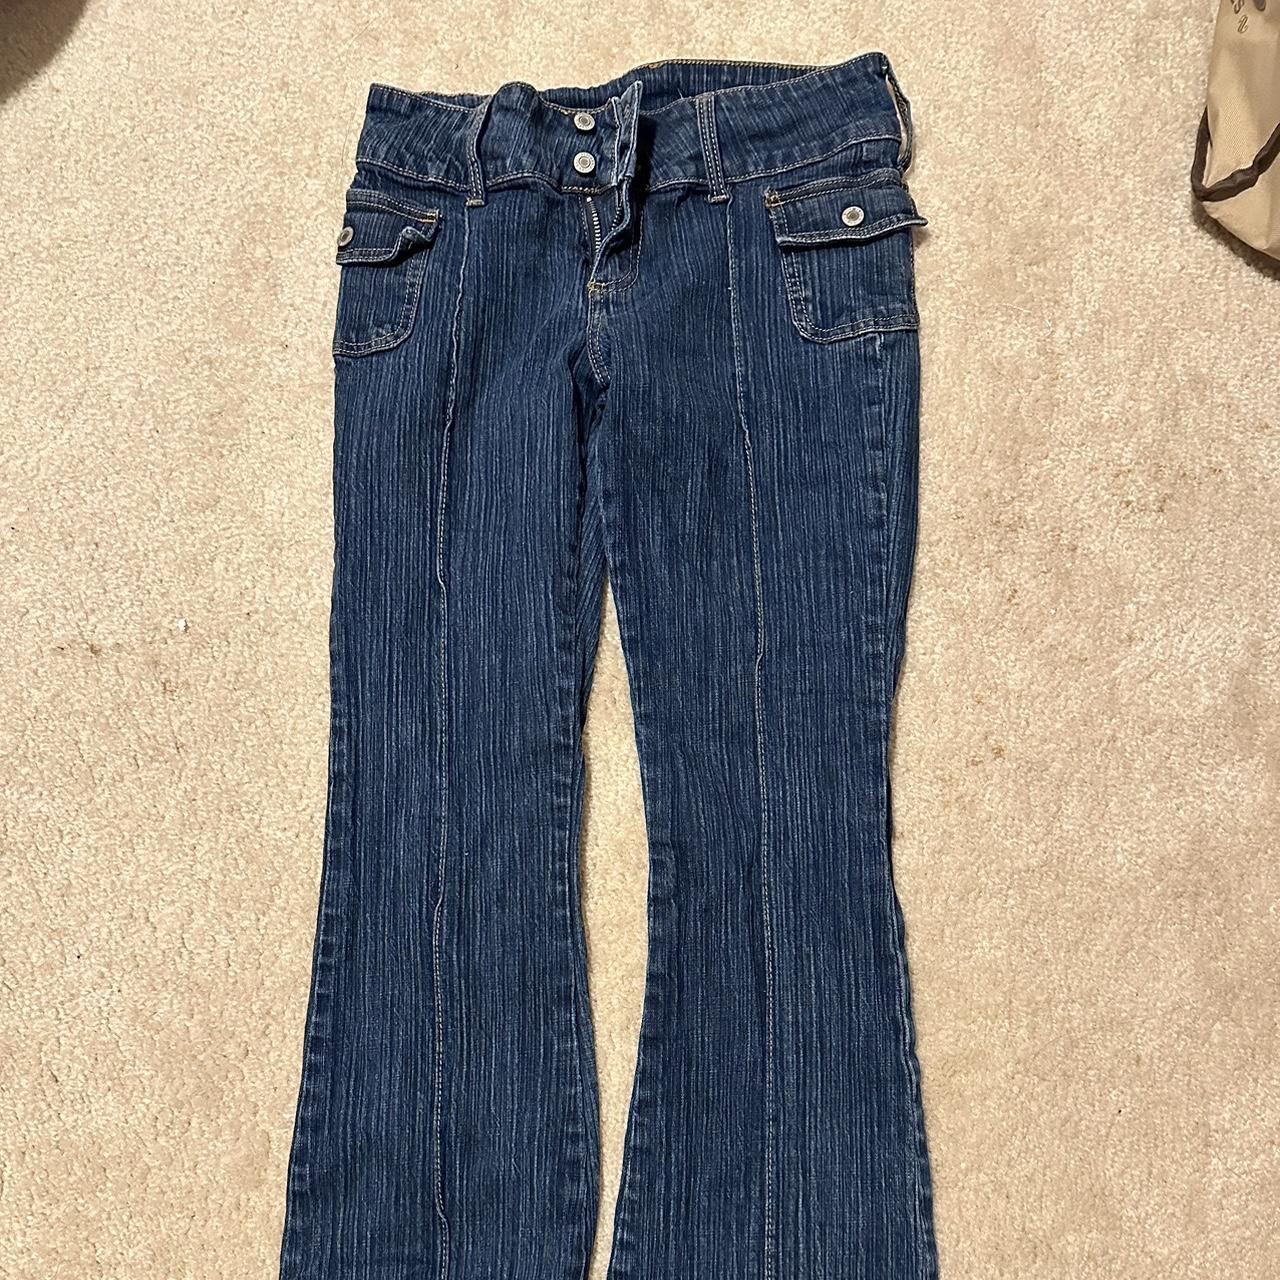 brandy melville agatha jeans. worn once or twice,... - Depop